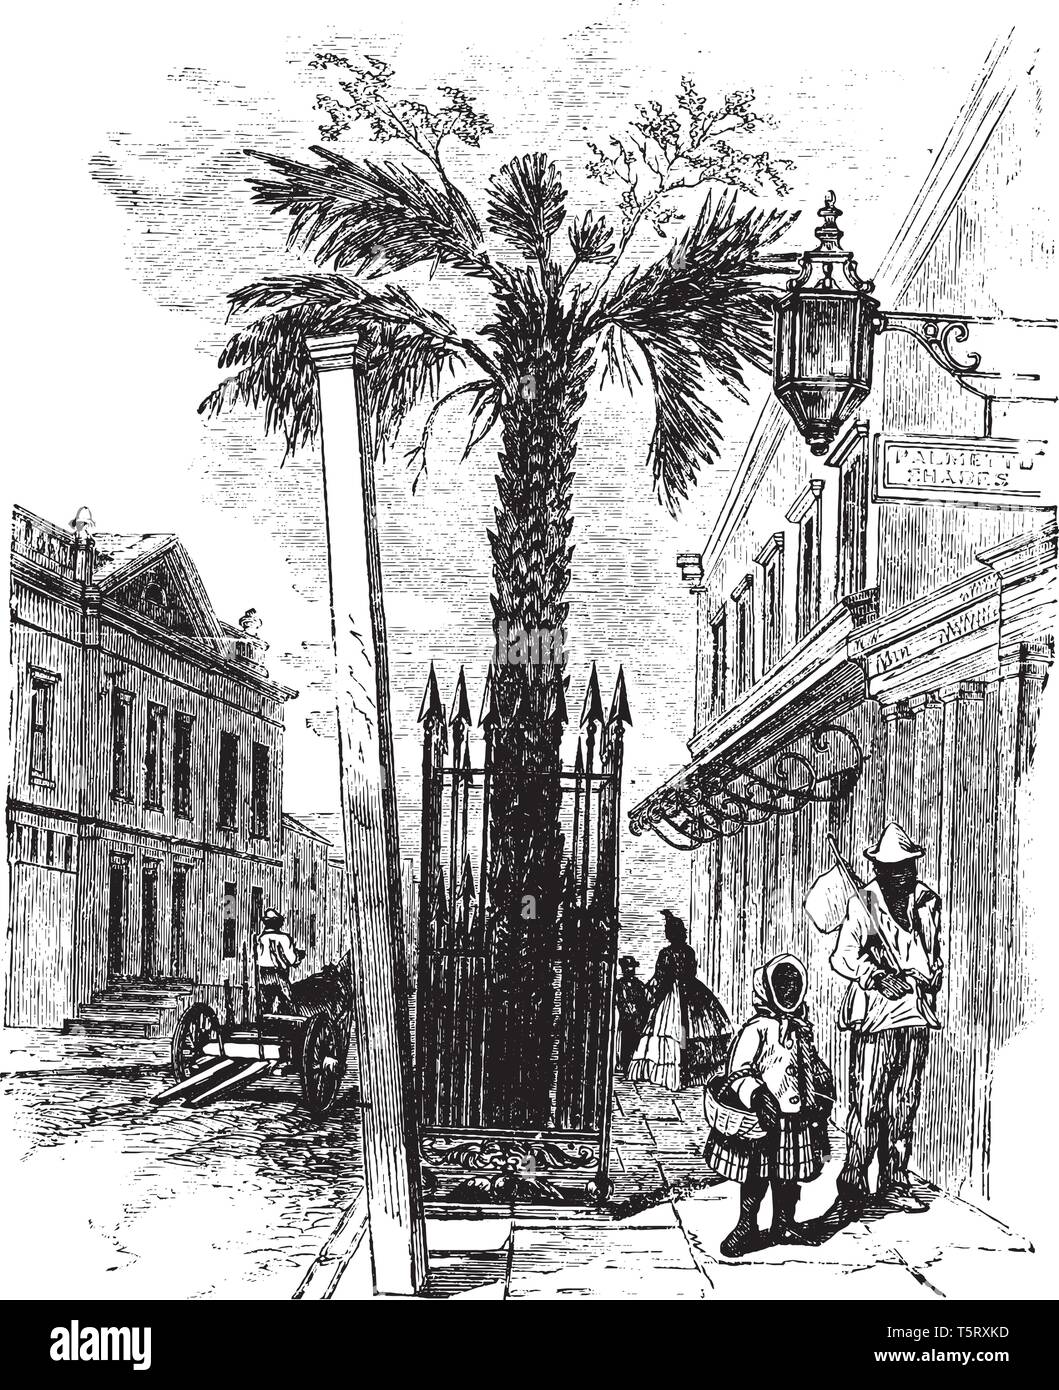 A palm tree occurring in the south-eastern U.S. and the West Indies. Commonly grown for shade and as ornamentals along avenues, palmettos grow to abou Stock Vector